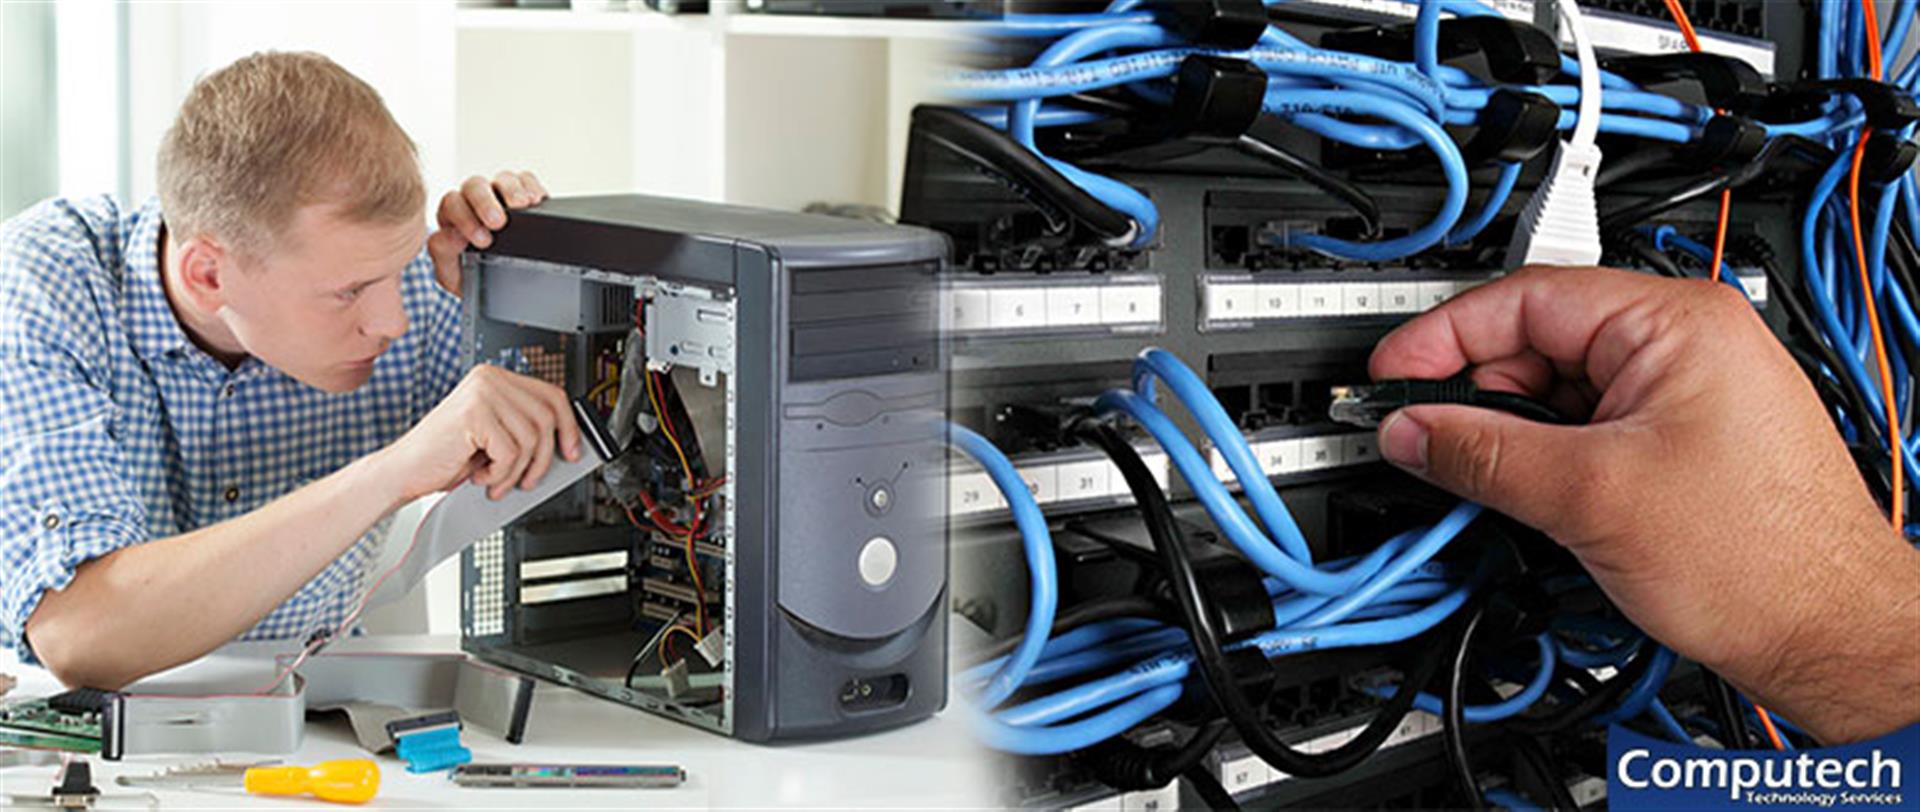 Falls Church Virginia Onsite Computer PC & Printer Repairs, Networks, Voice & Data Cabling Services